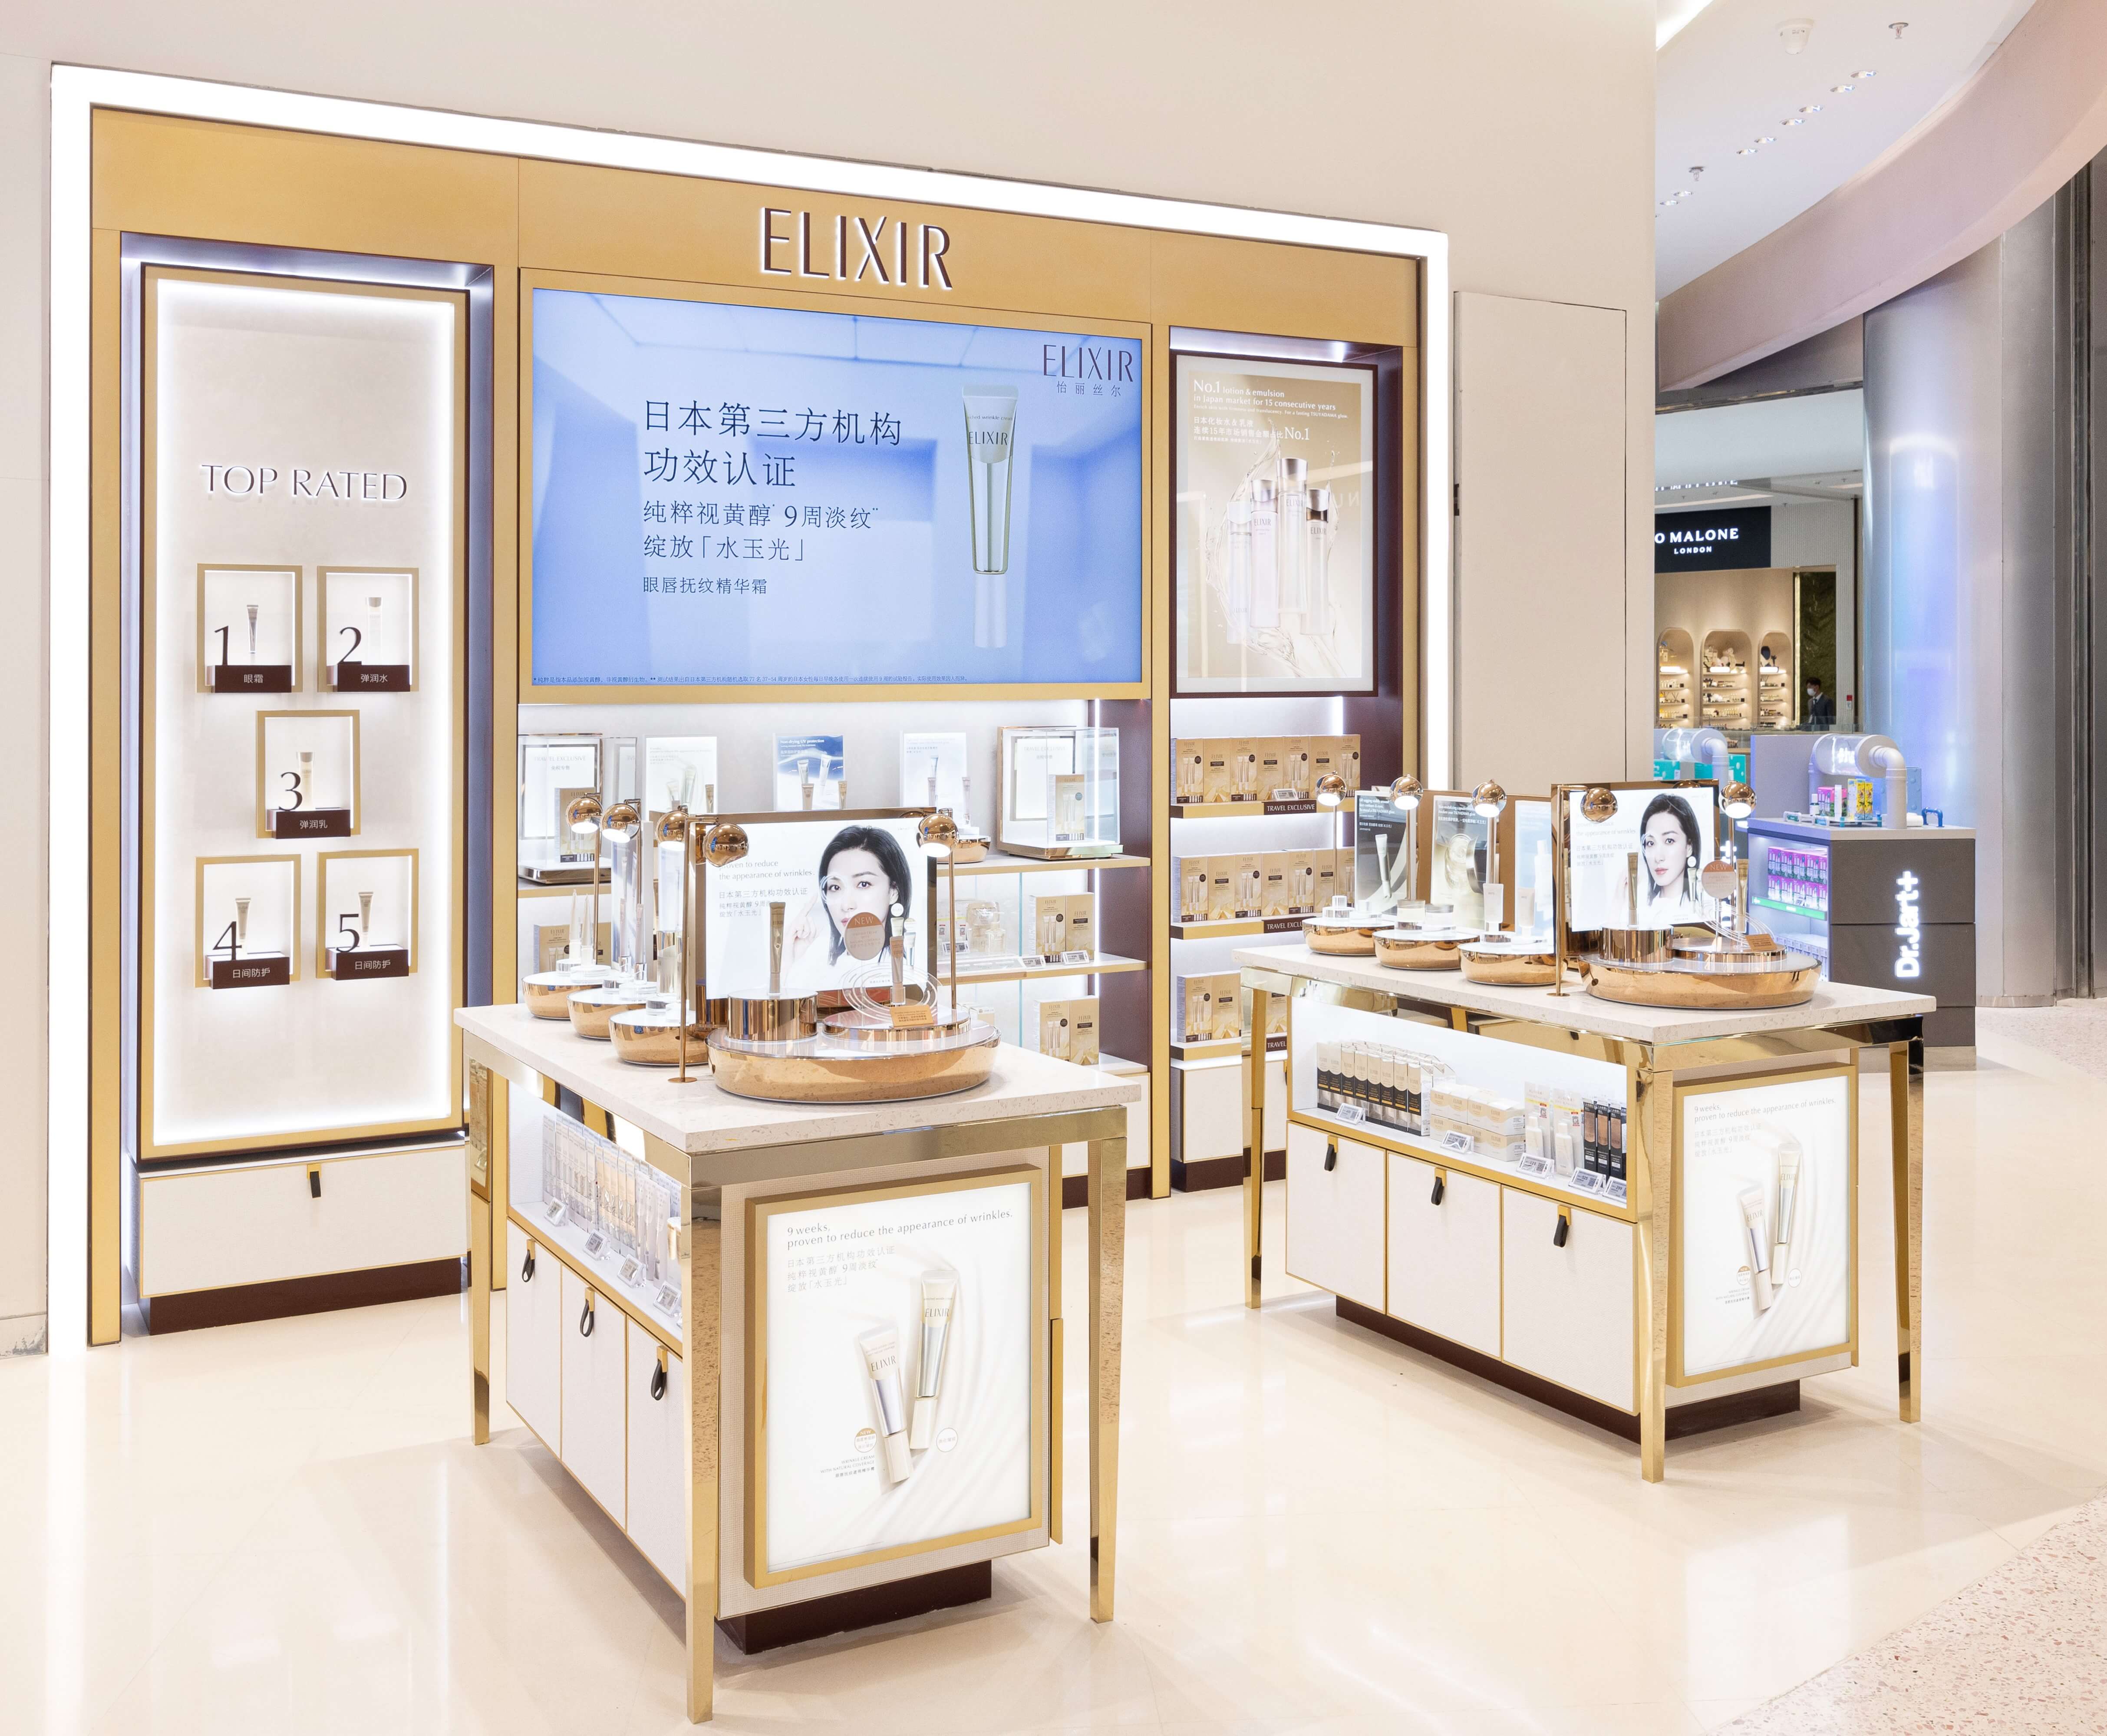 Shiseido Travel Retail opens series of boutiques with CDFG